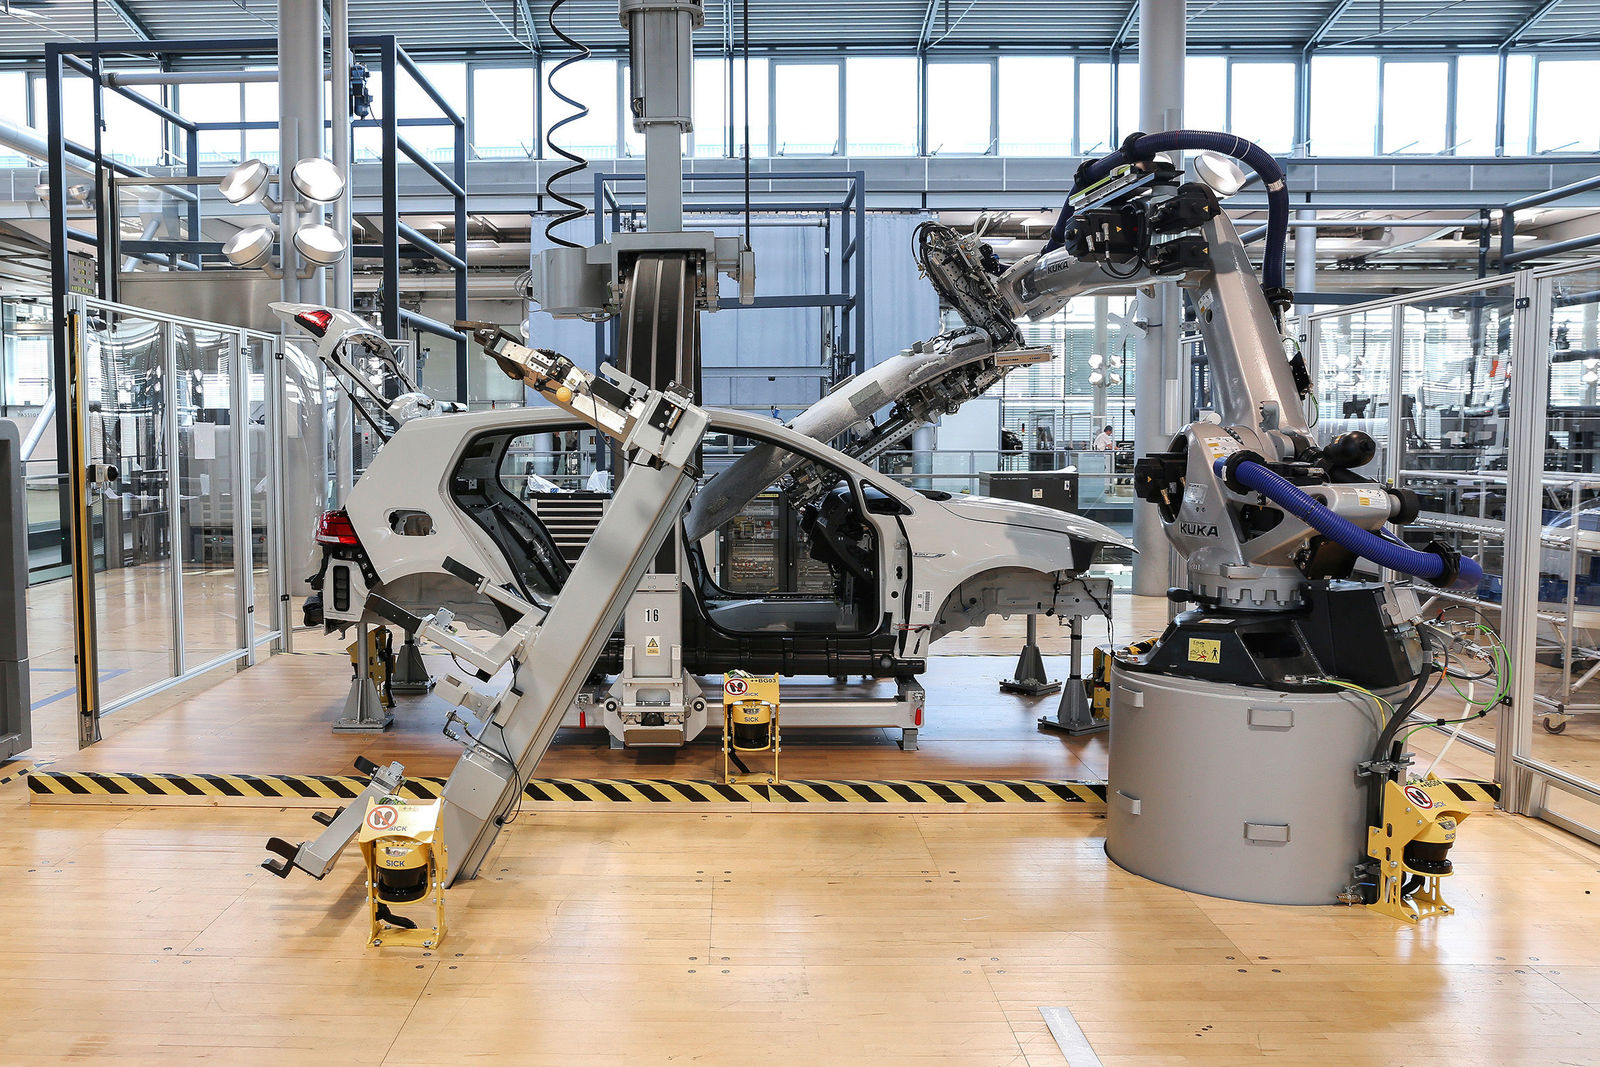 Volkswagen 4.0 – the production systems of tomorrow are being developed in the Gläserne Manufaktur in Dresden